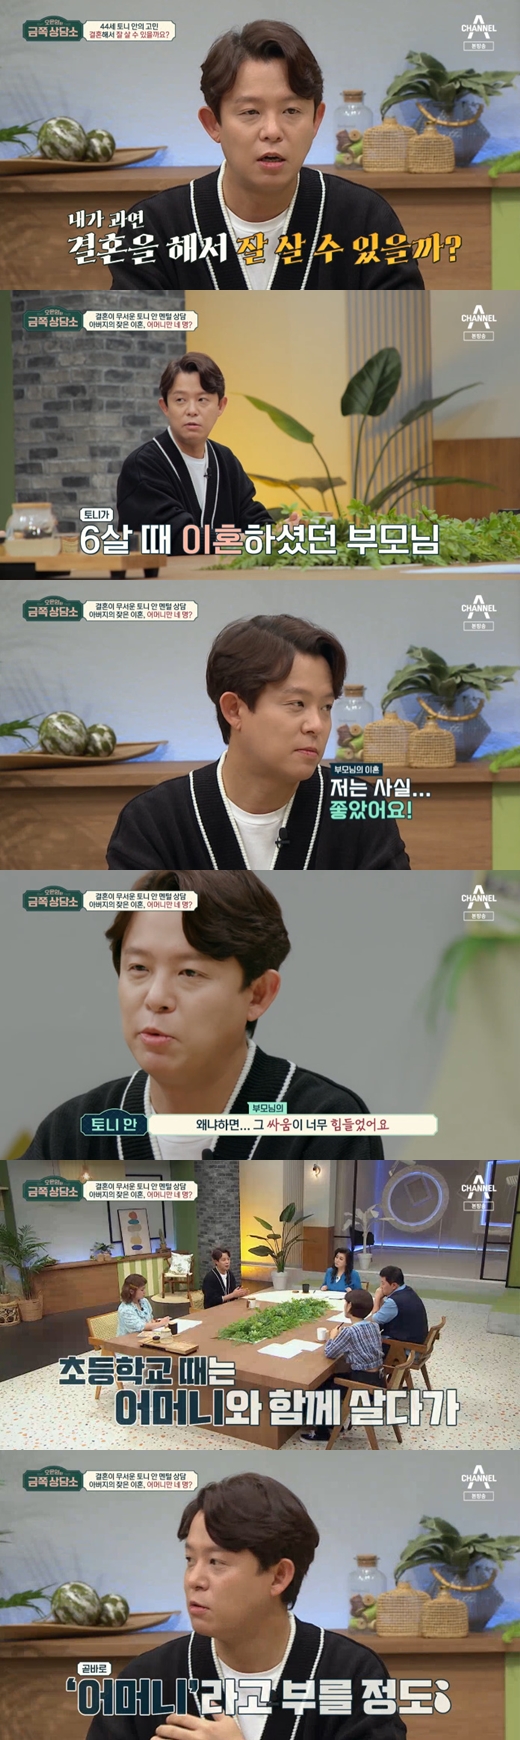 Singer Tony Ahn has made his family history Confessions.Channel A Oh Eun-youngs Gold Counseling Center broadcast on the 29th introduced the troubles of singer Tony Ahn and Actor Nam Bo-ra.Tony Ahn said, Now that I am old, I seriously think that I want to marriage, but on the other hand, I have a fear that I can live well even if I marriage.Tony Ahn said: I think the impact of my parents is great, and at six, my parents did a divorce.In fact, I can not remember the occasion of the diverce, but my parents divorce was frankly good. At that time, it was scary for my parents to fight every day. In fact, I have three new Mothers besides Pro Mother. Mother is four. When I spent my adolescence, I said, Do you think?I came to think, he added.